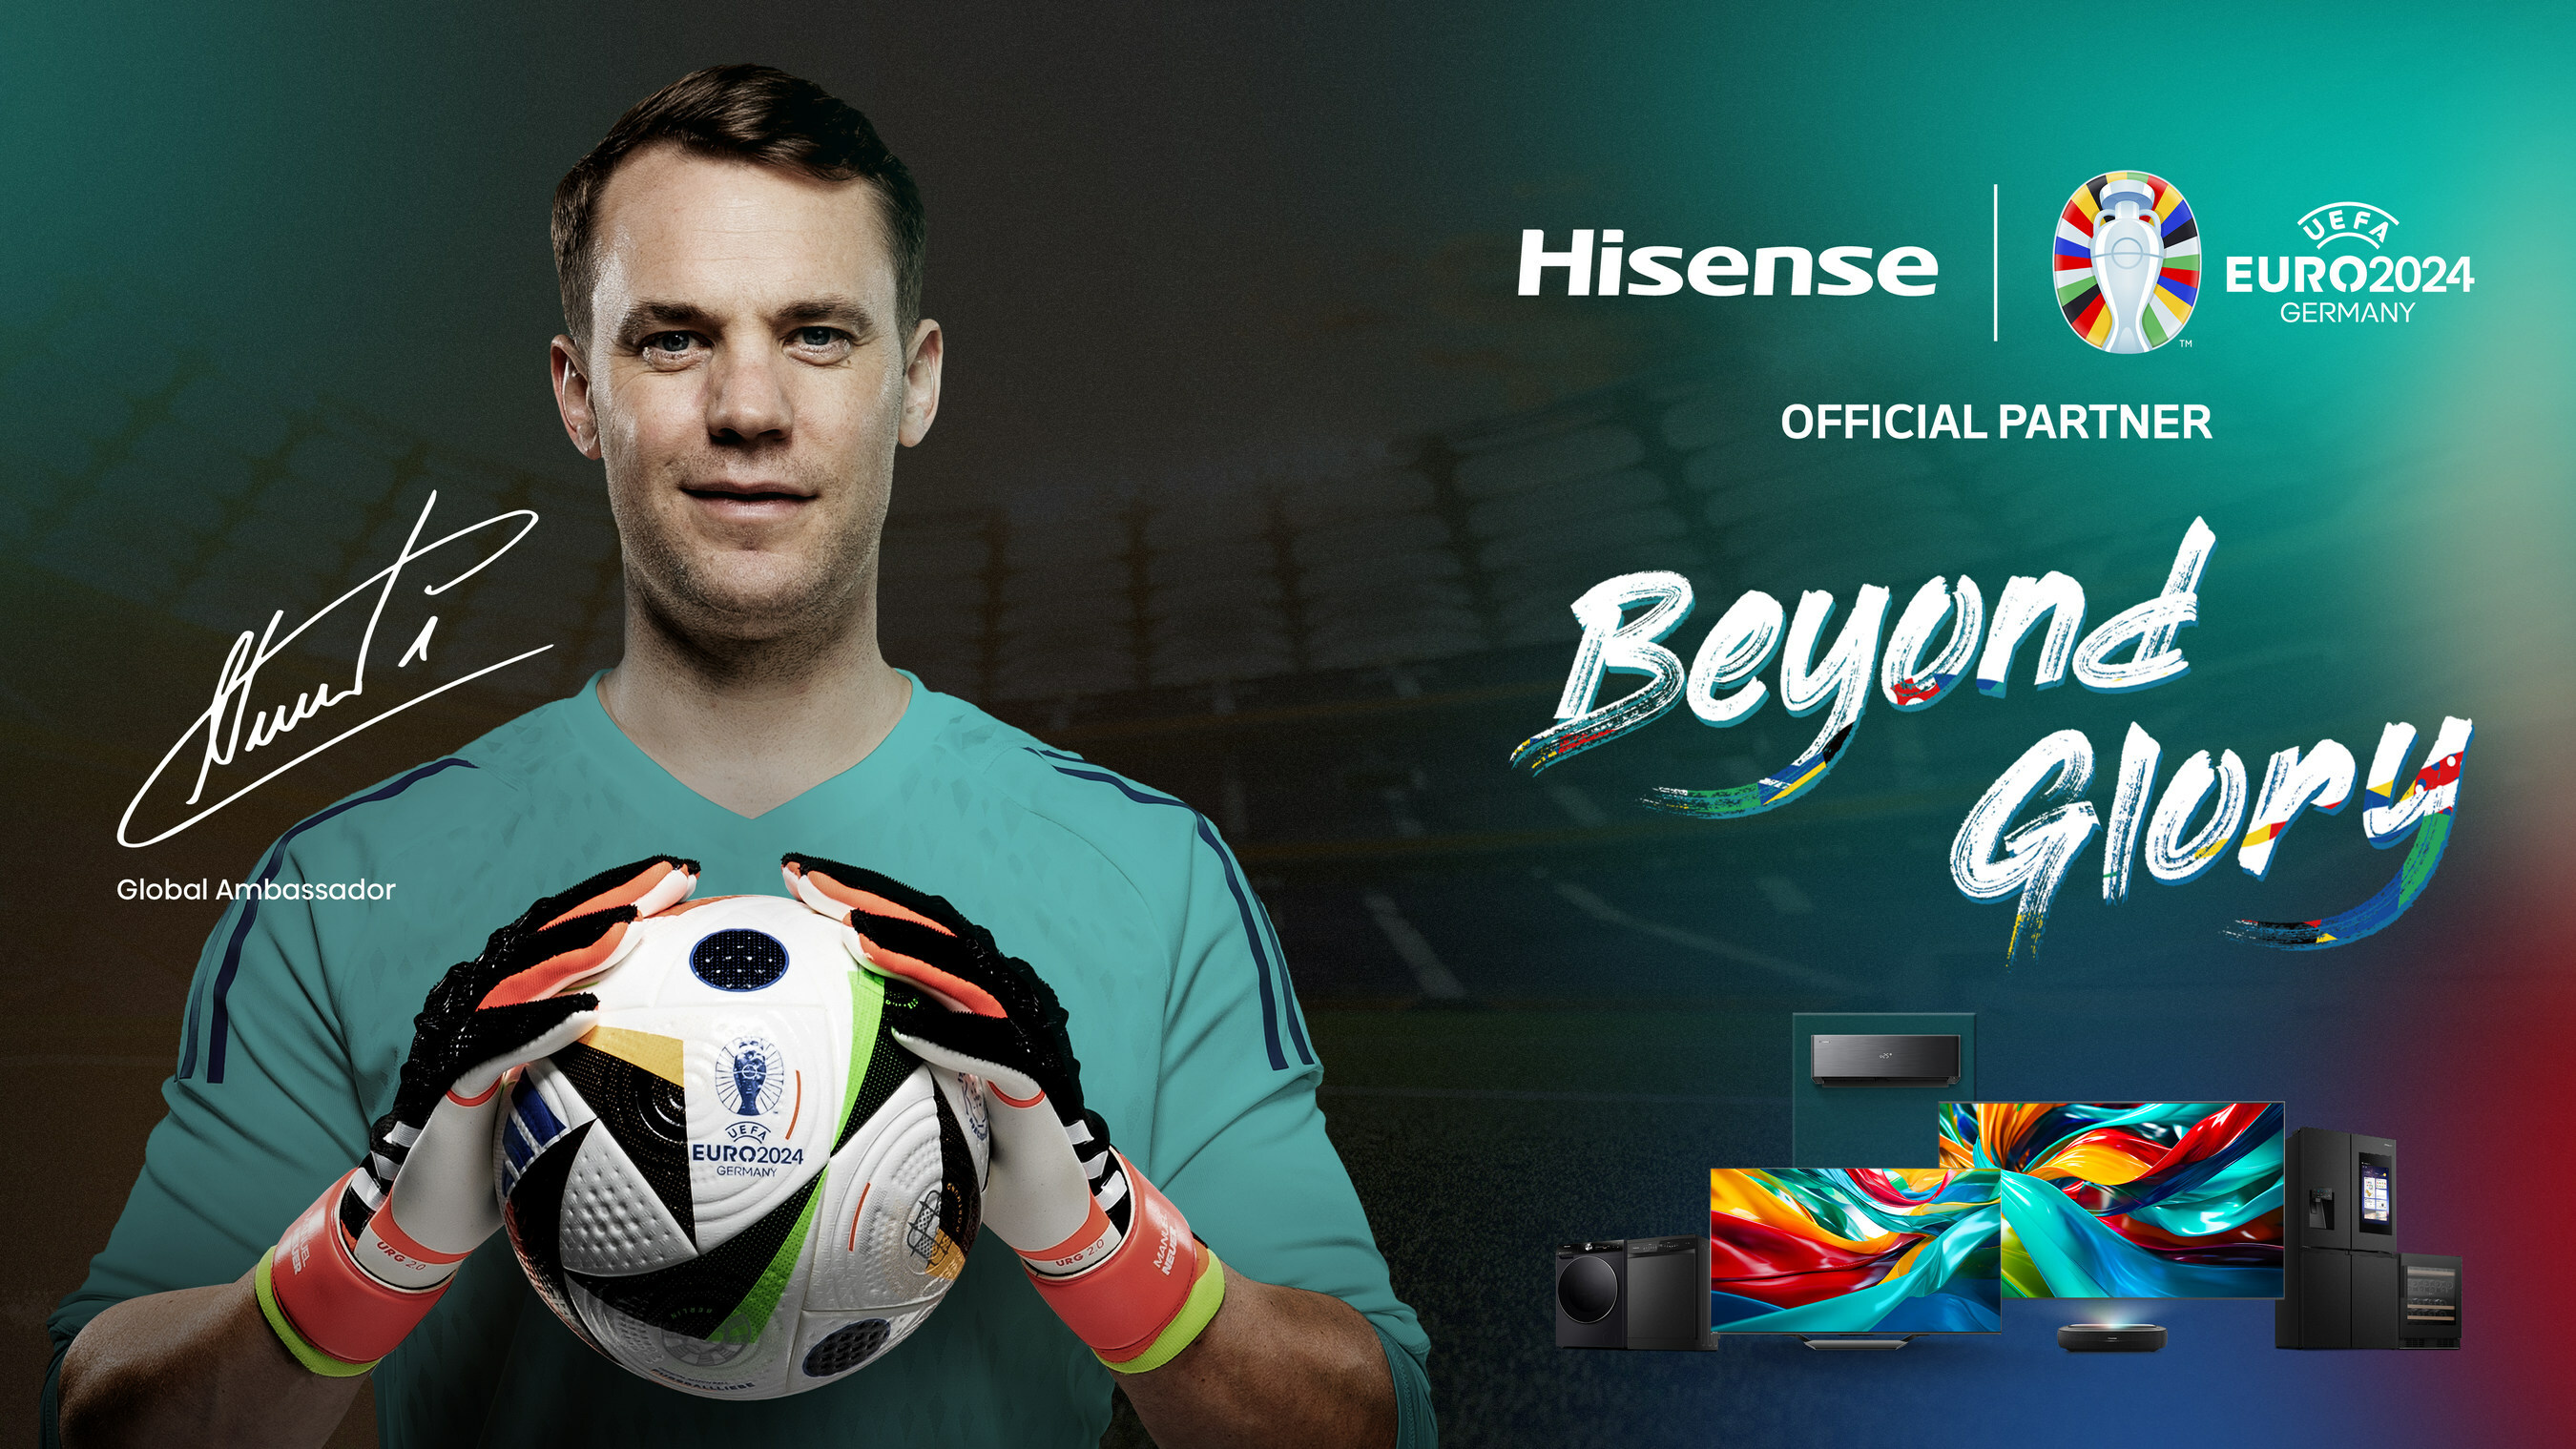 Germany goalkeeper Manuel Neuer is appointed official ambassador of the Hisense 'BEYOND GLORY' UEFA EURO 2024™ campaign 